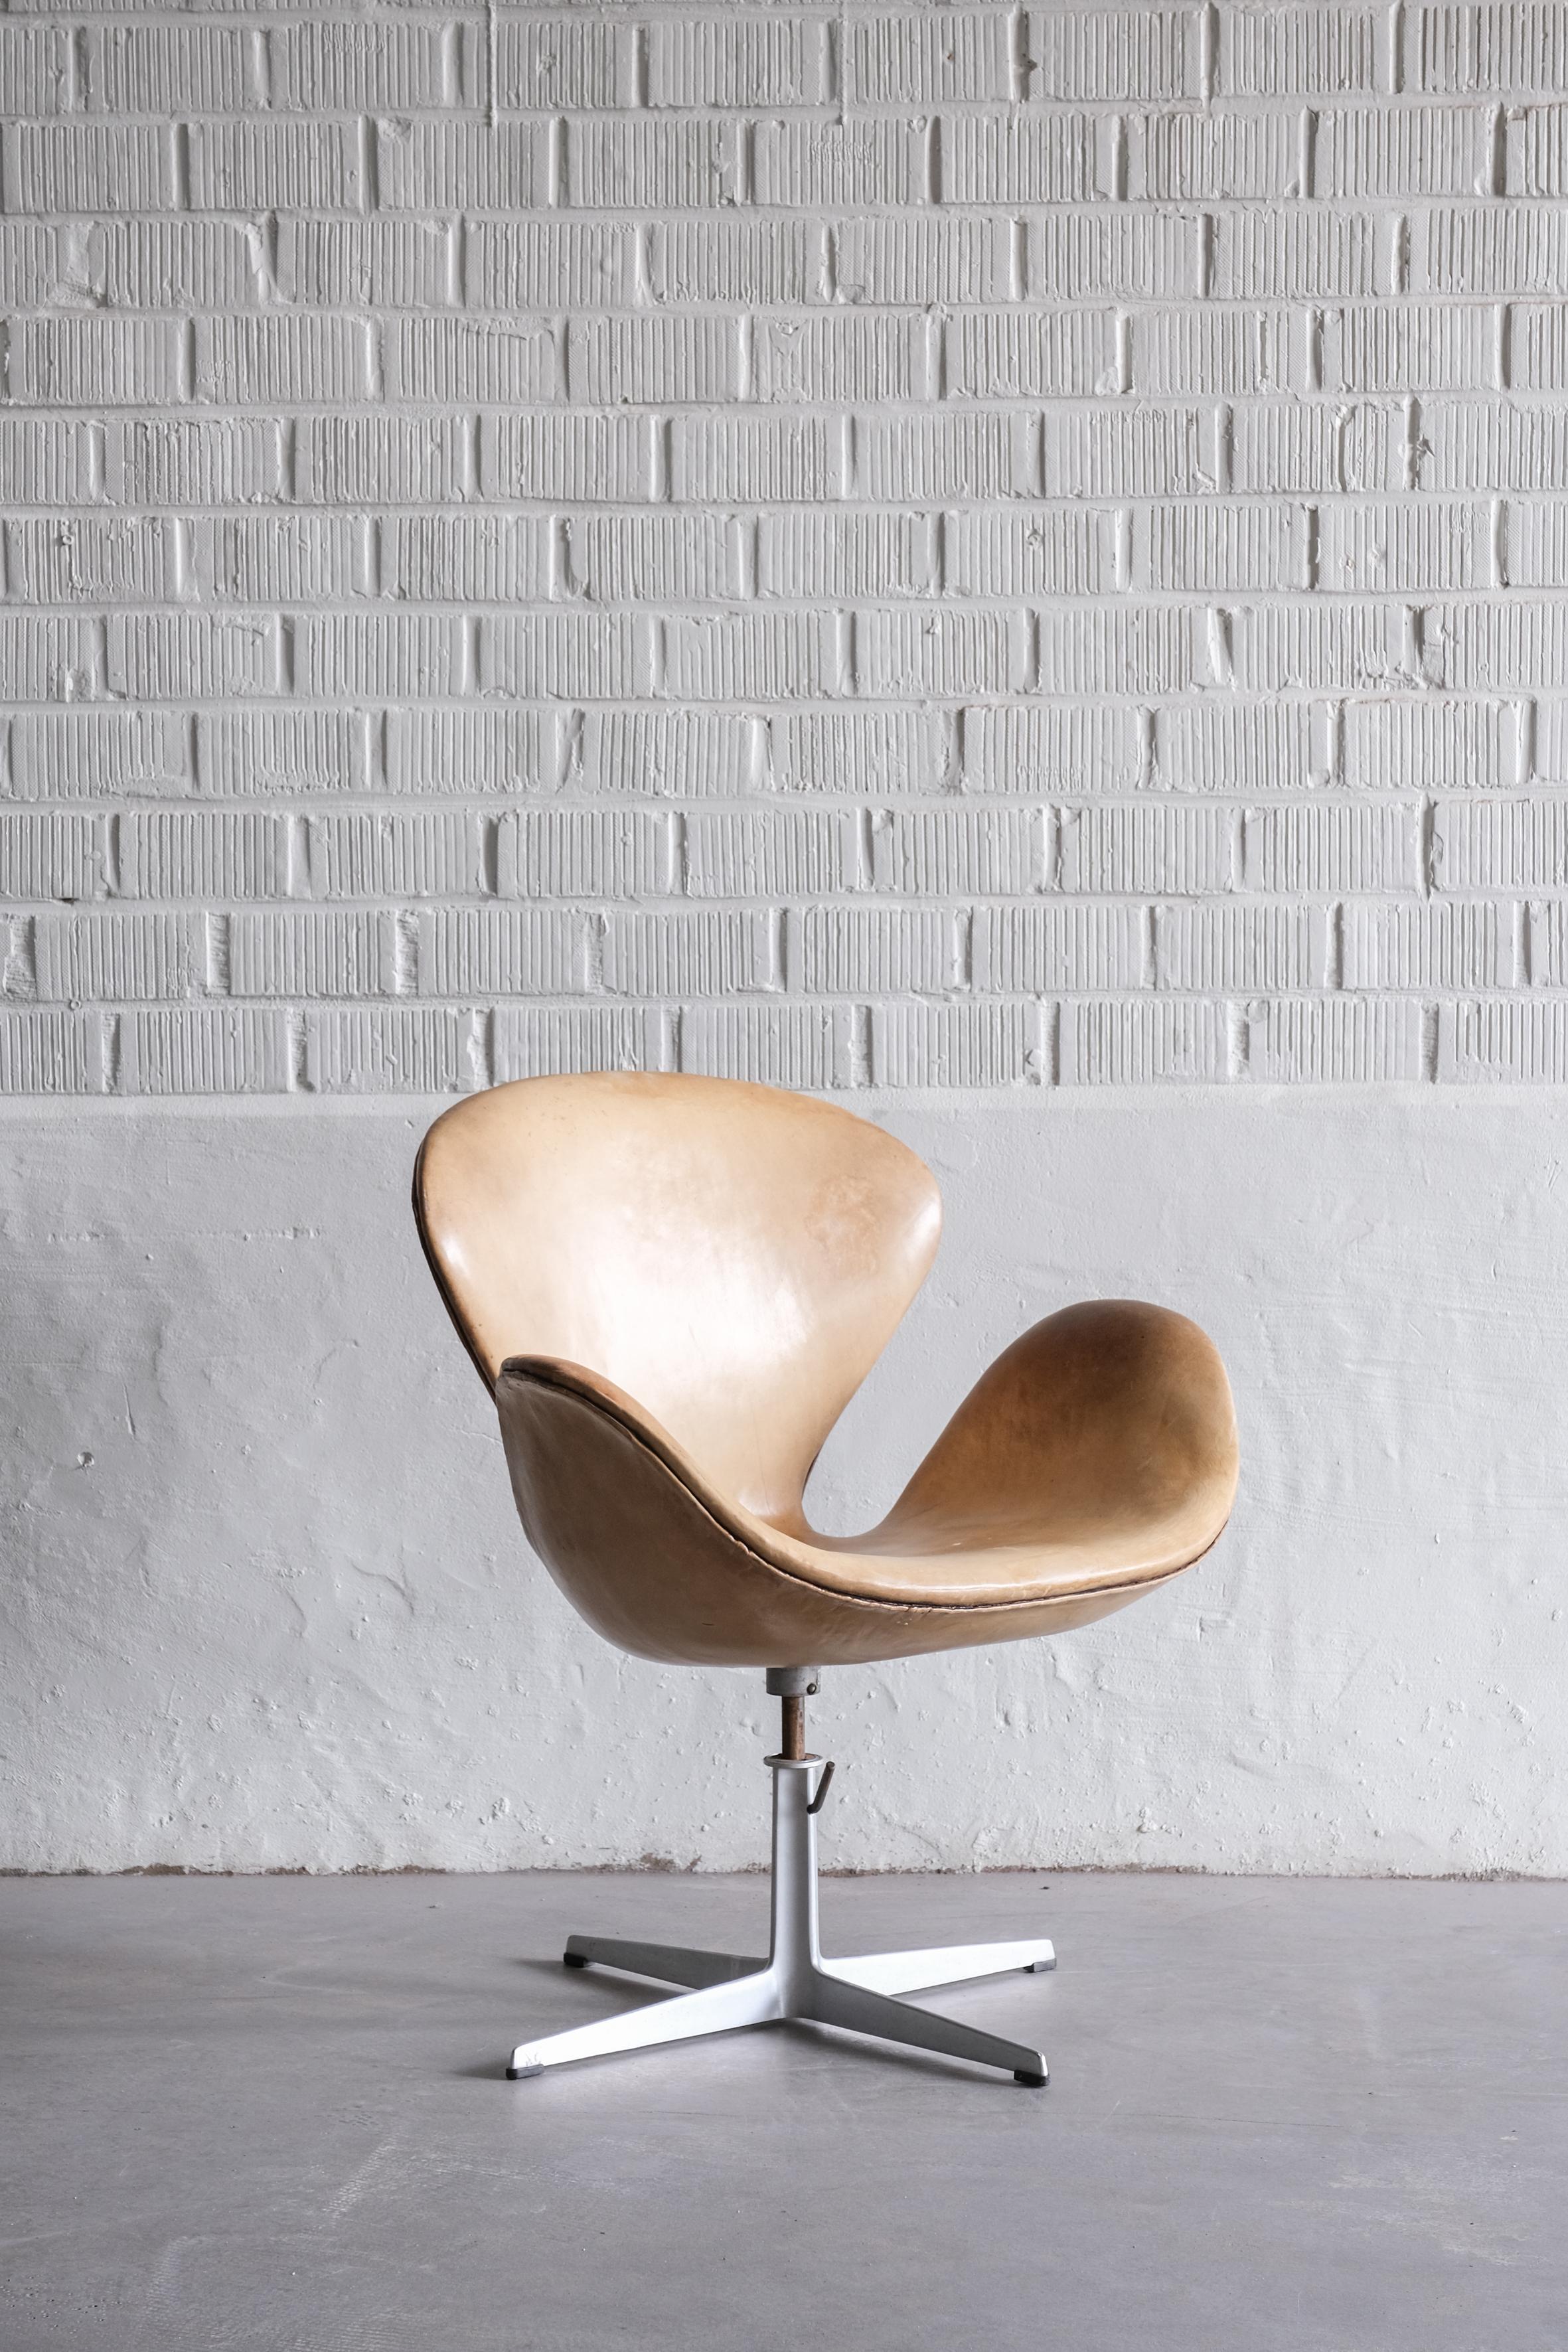 wan Chair in beautiful light original Leather

The chairs have the very rare option of height adjustability, so you could use them as a desk or dining chair as well. Chair marked with label, made in 1971.